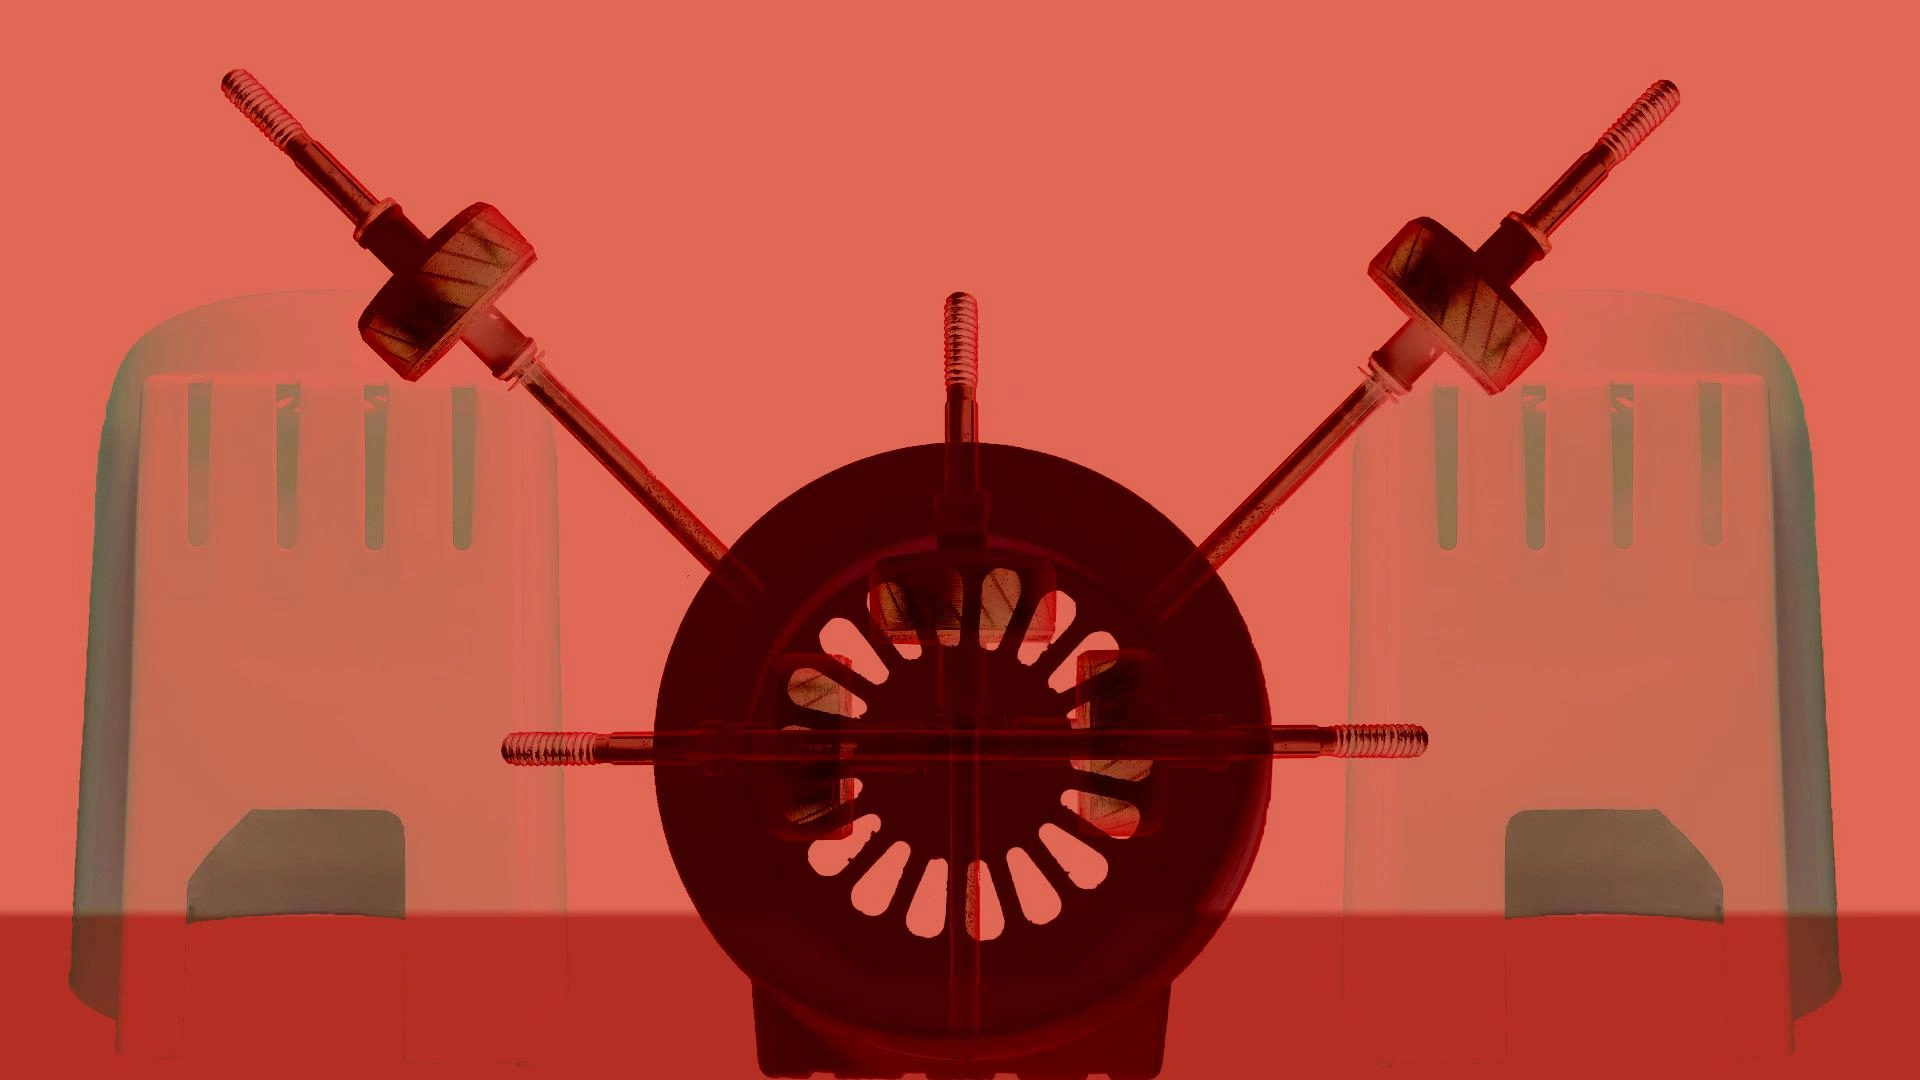 Screenshot from Eternal Engine, a red circular machine with pumps. There is two cyclindrical towers in the background flanking the machine